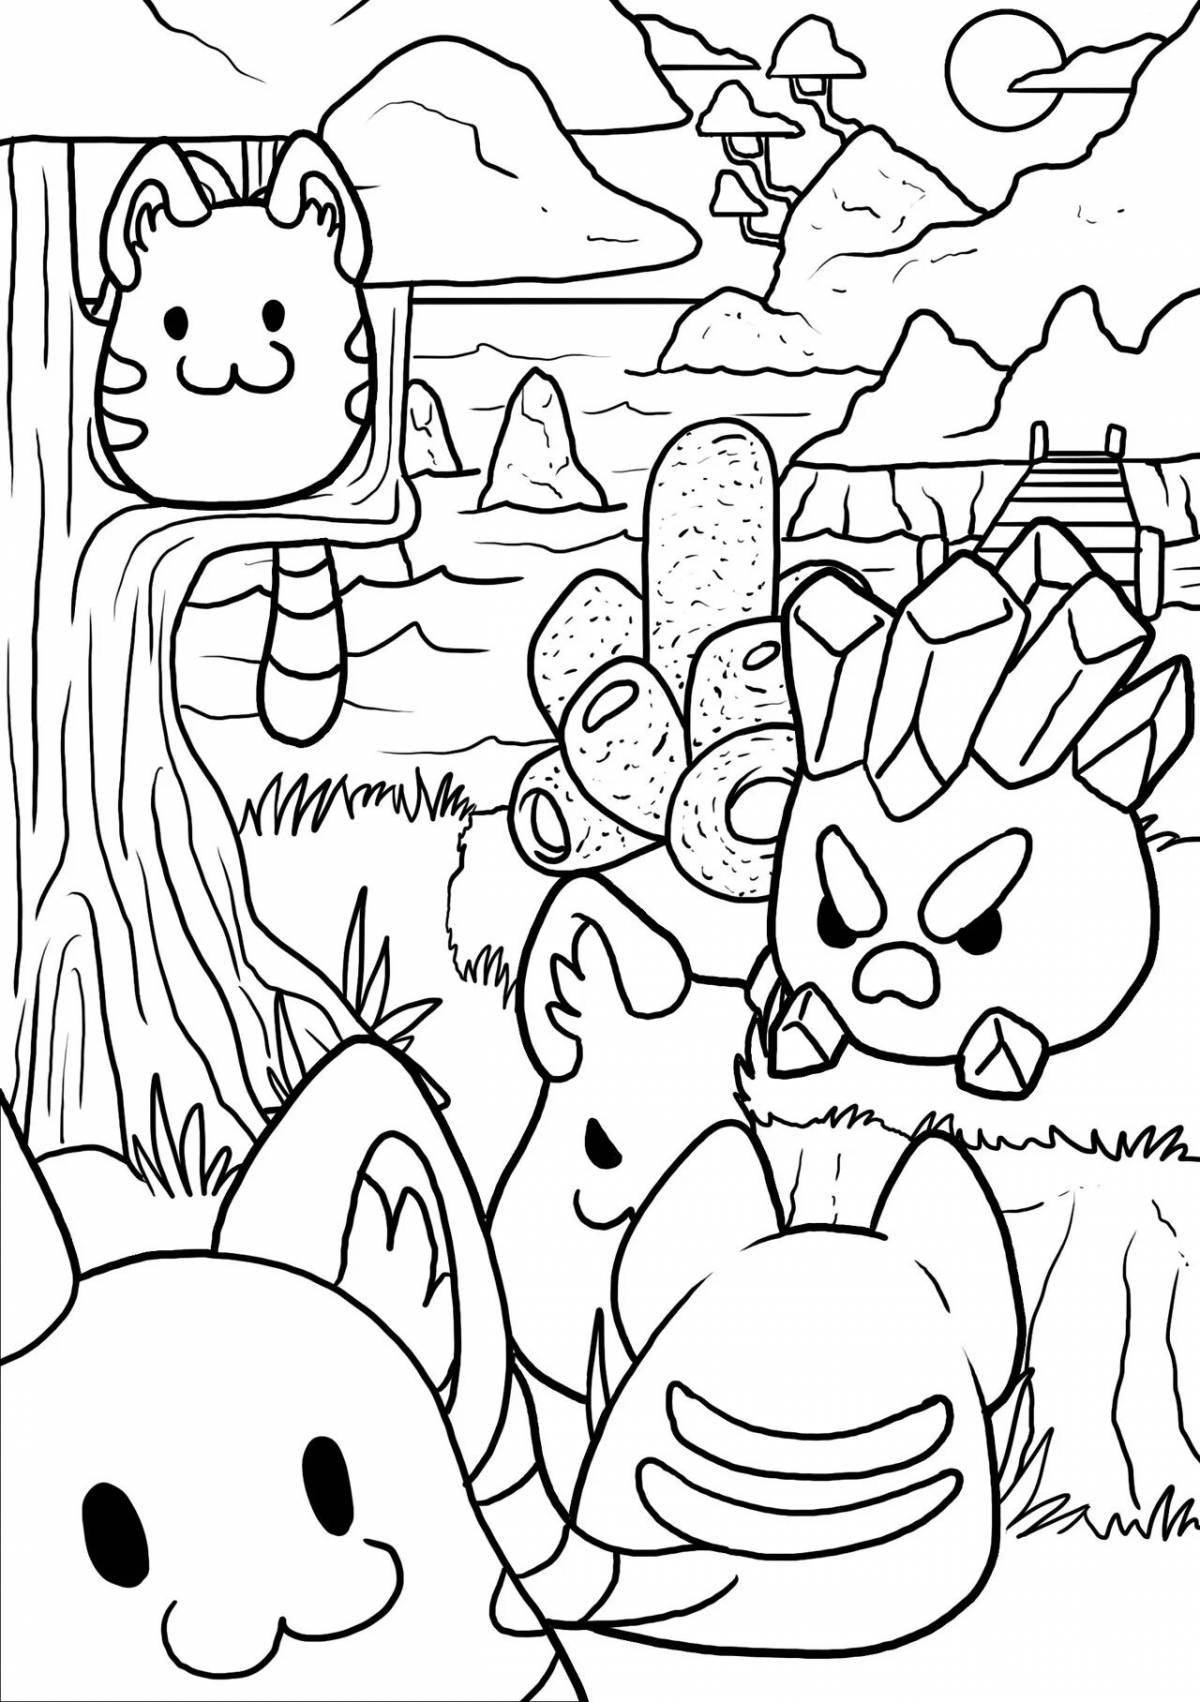 Impossible slime rancher coloring book